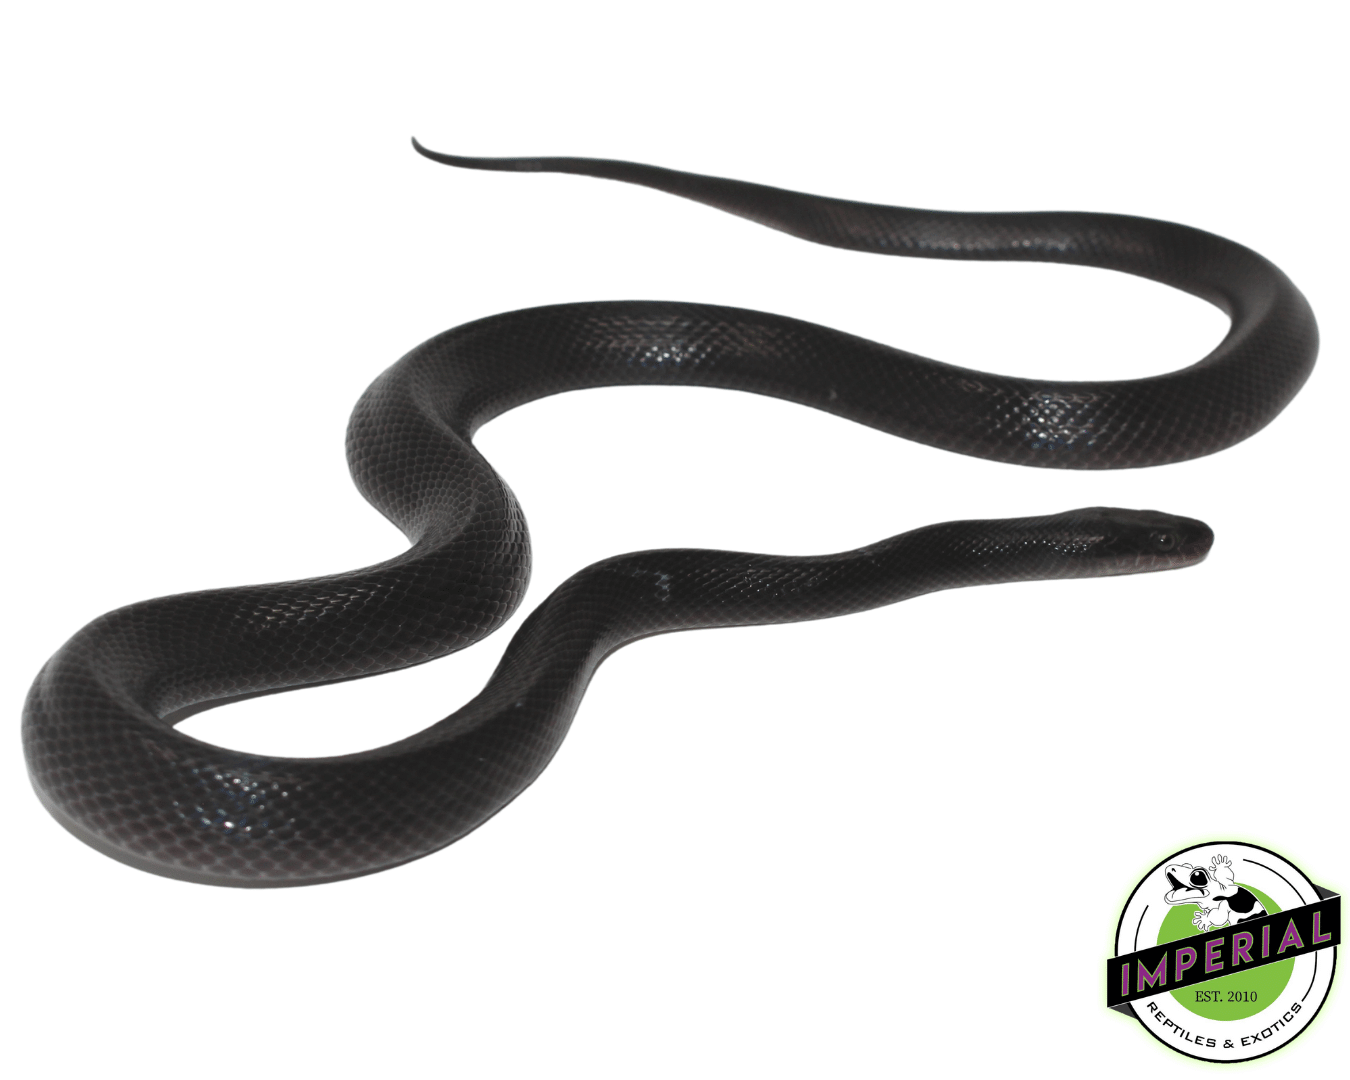 african black house snake for sale, buy reptiles online